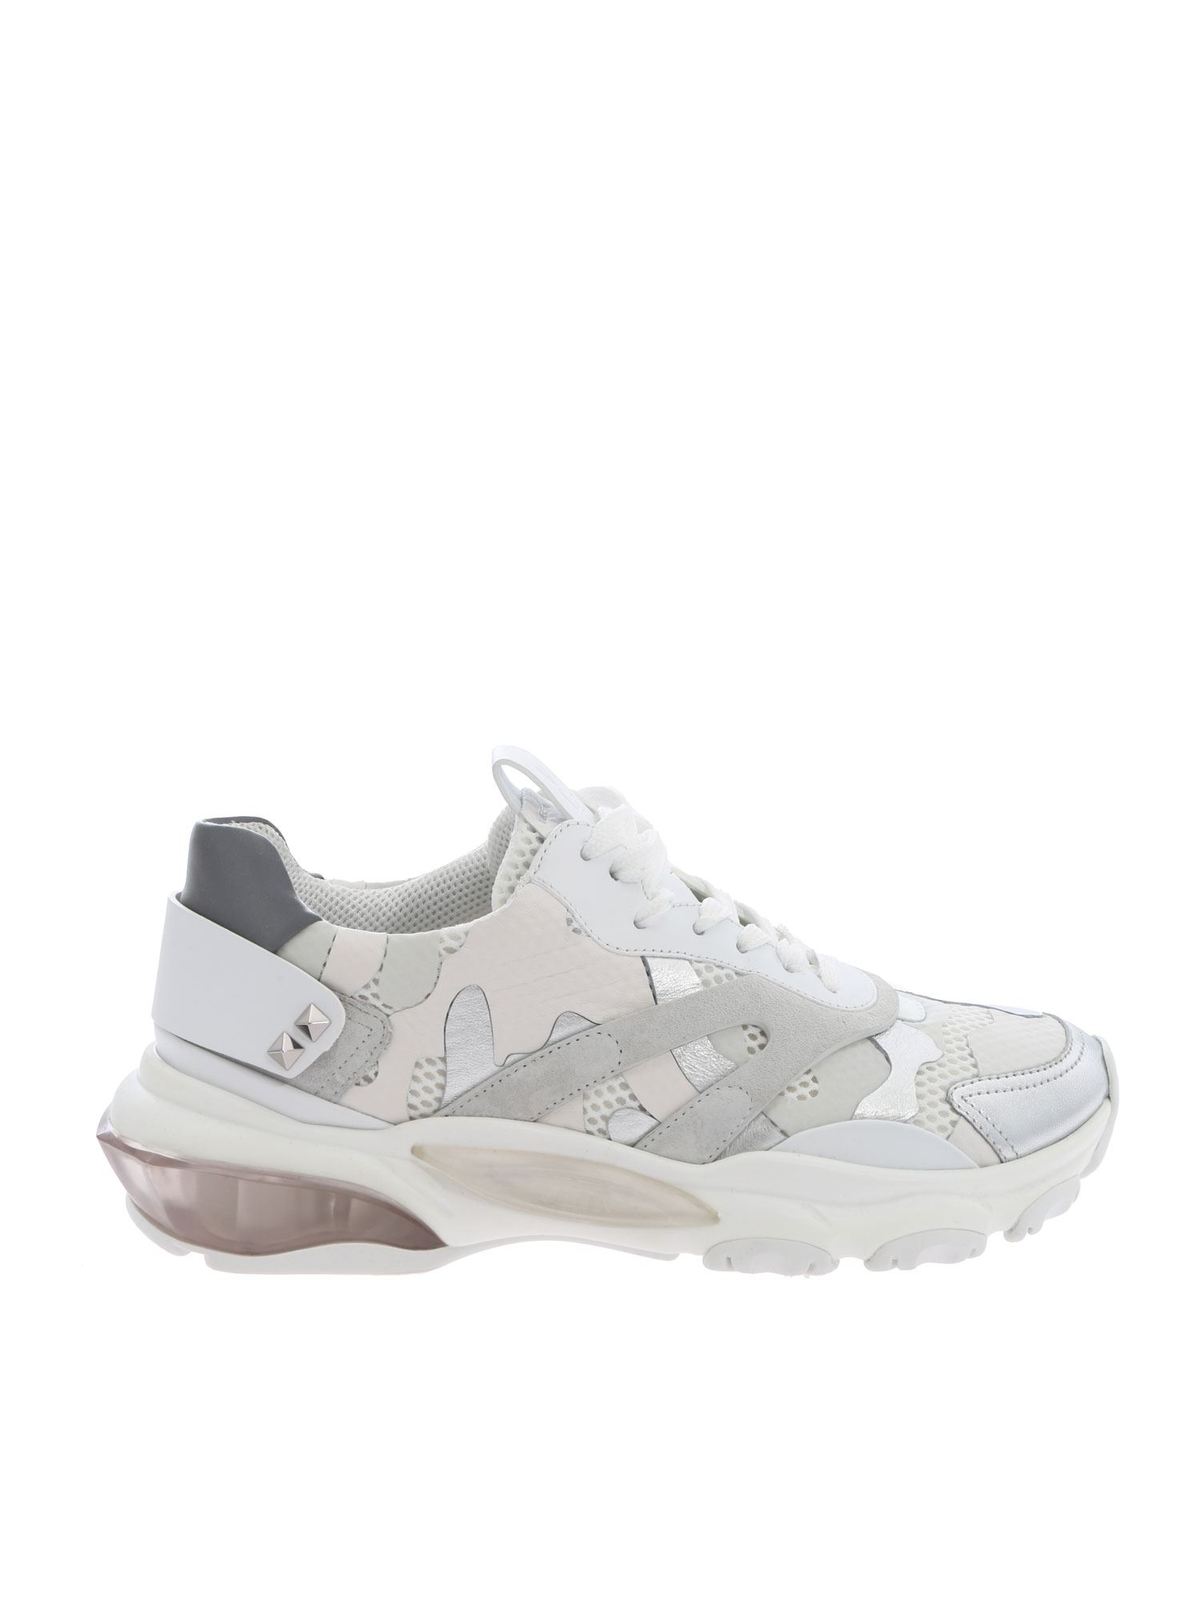 valentino bounce low top